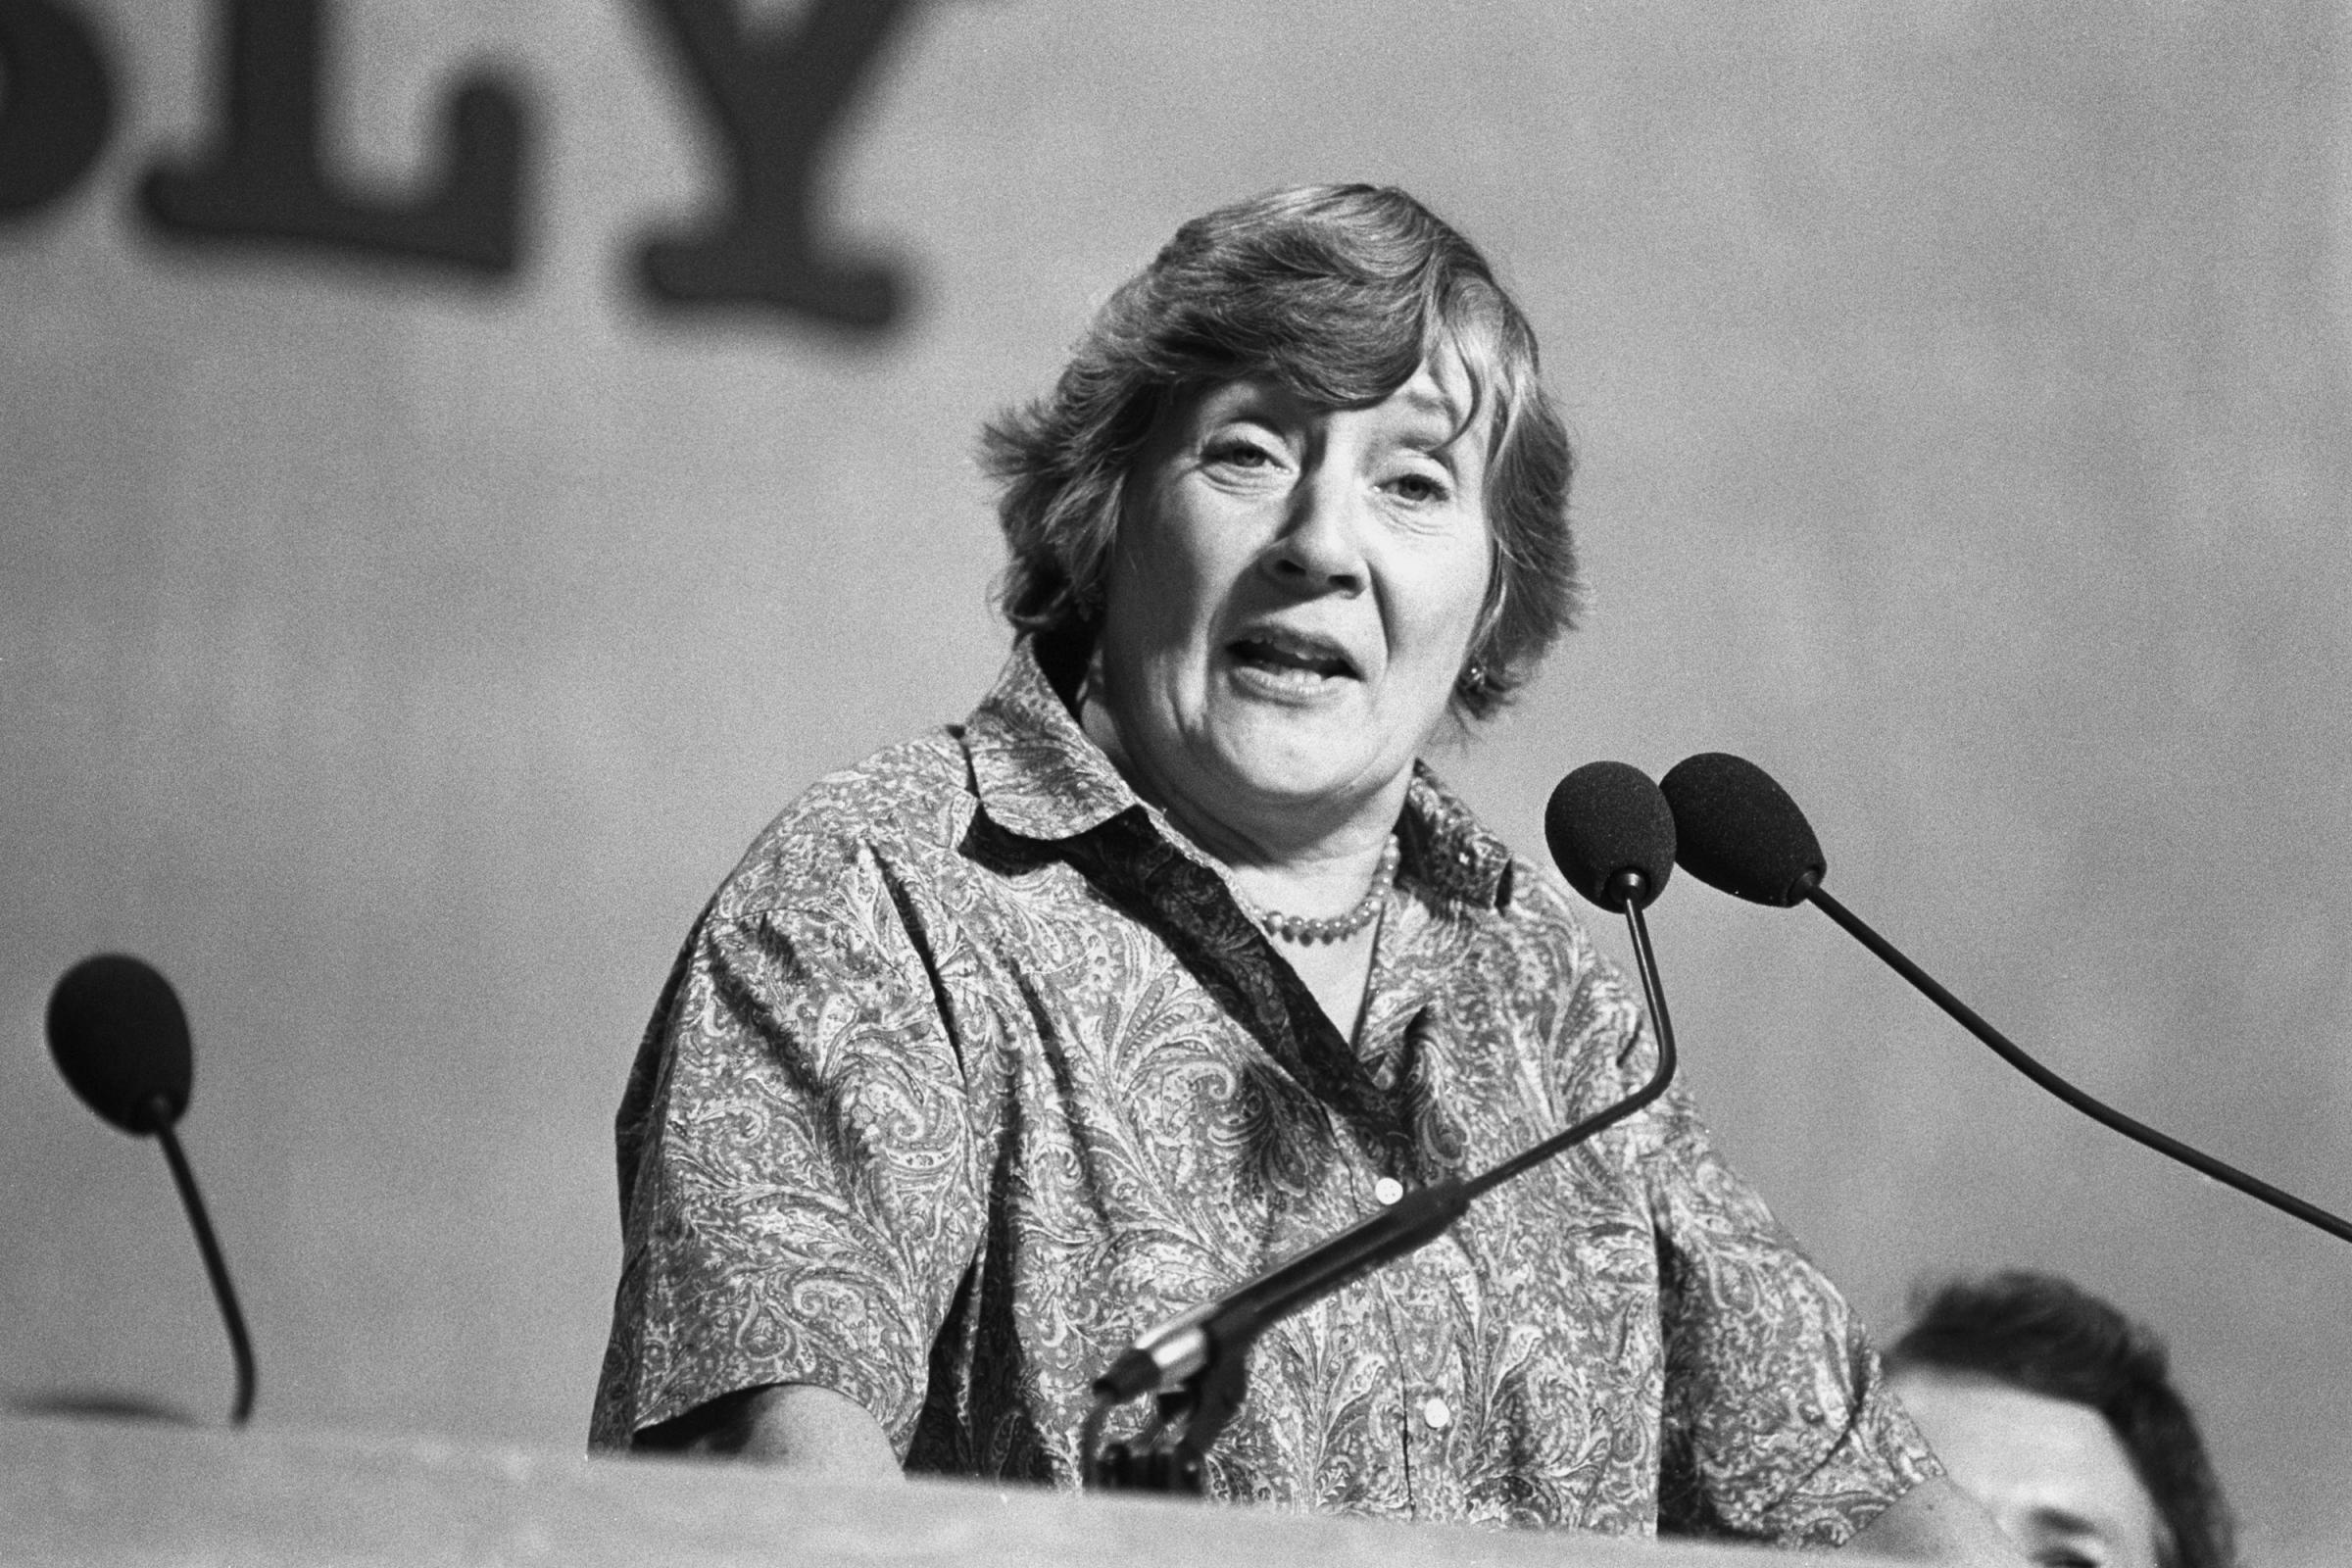 Tributes - Baroness Shirley Williams, who started her political career in the 1954 Harwich by-election, has died aged 90. Inset: Party colleague Sir Bob Russell